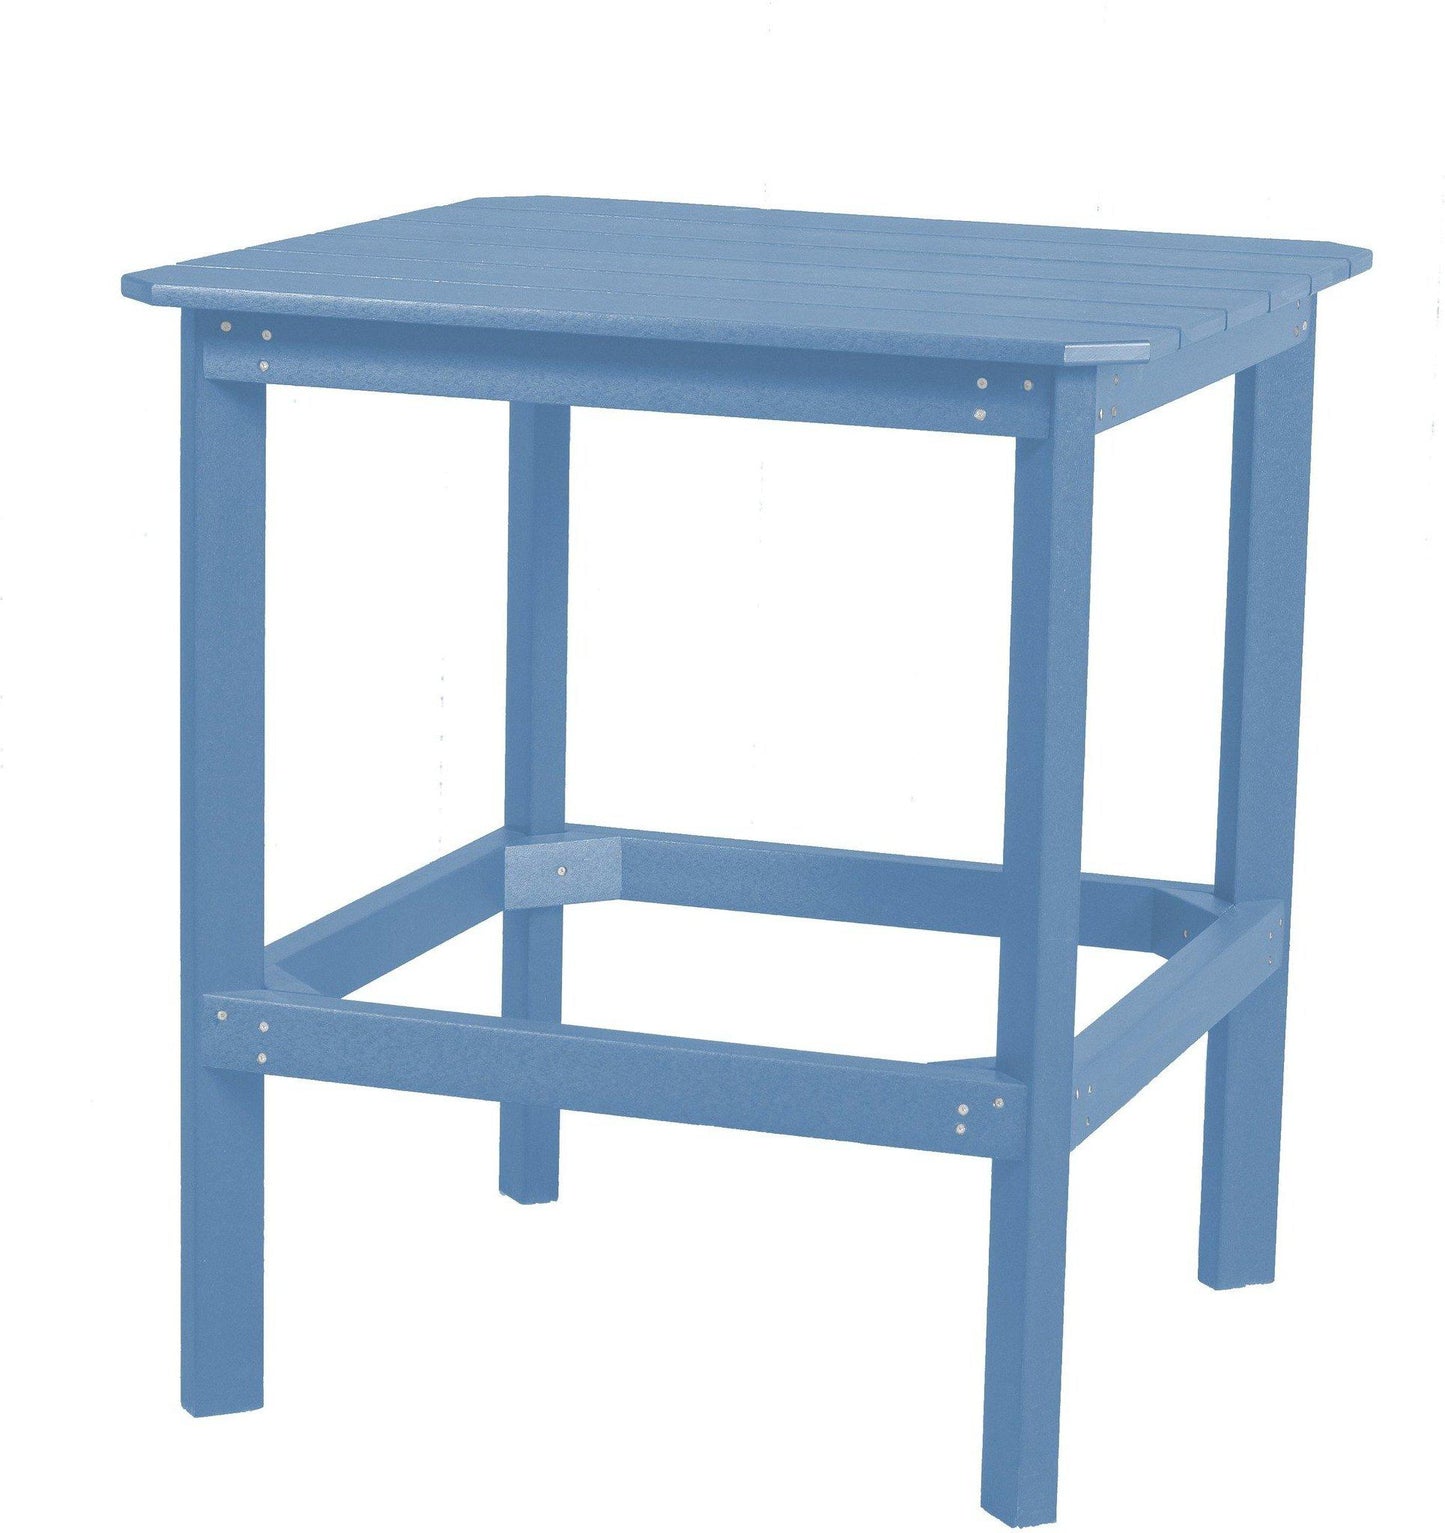 Wildridge Heritage Recycled Plastic Outdoor 36" High Dining Table (COUNTER HEIGHT) - LEAD TIME TO SHIP 6 WEEKS OR LESS